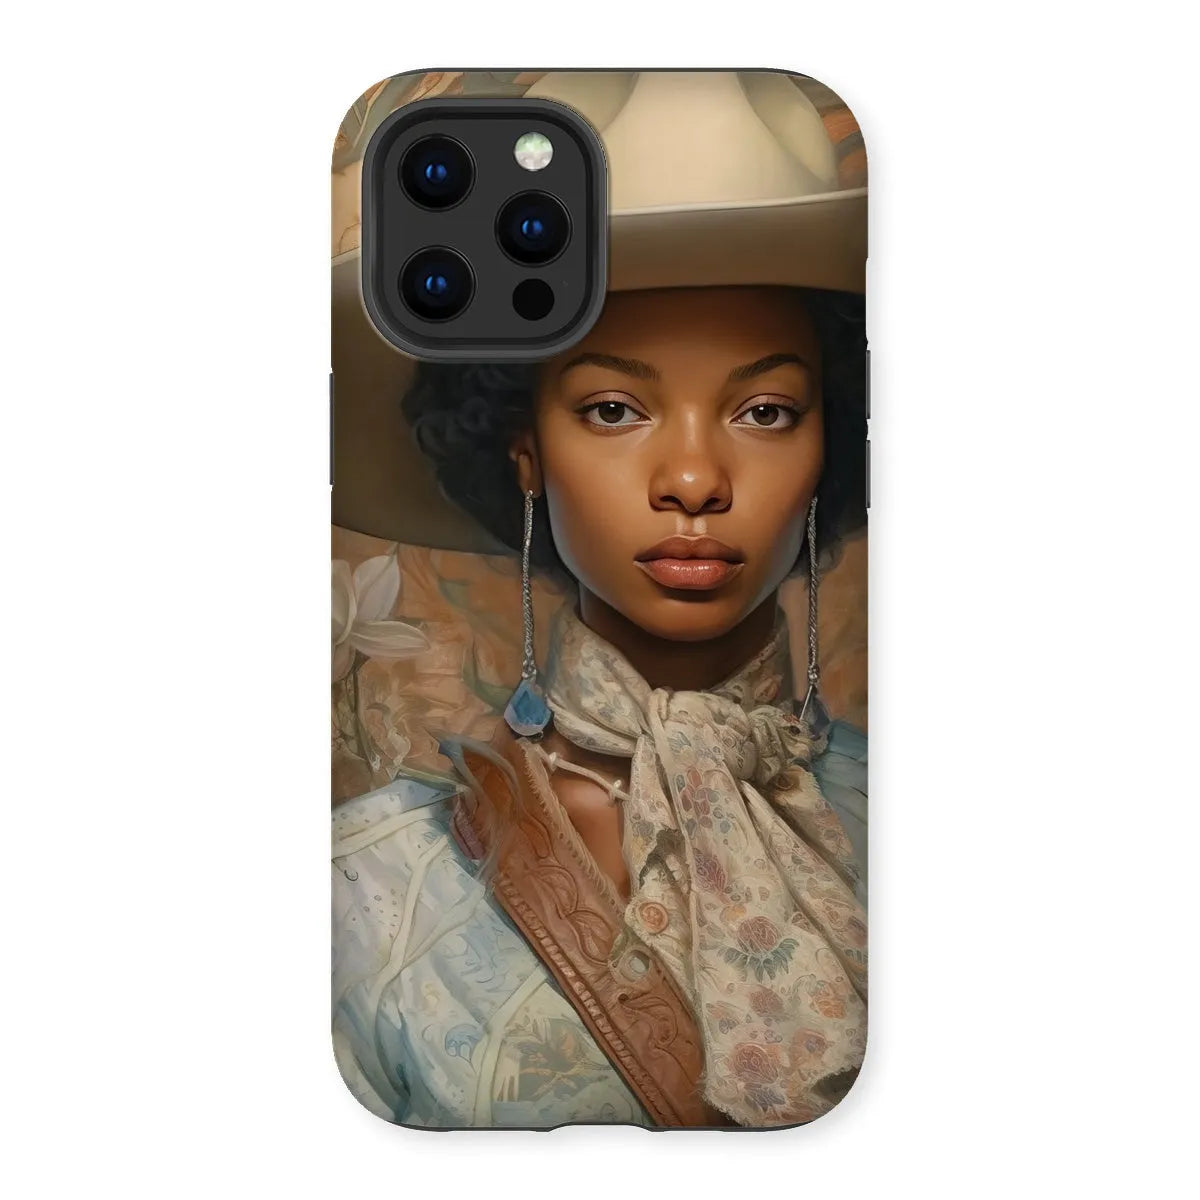 Imani The Lesbian Cowgirl - Sapphic Art Phone Case - Iphone 13 Pro Max / Matte - Mobile Phone Cases - Aesthetic Art